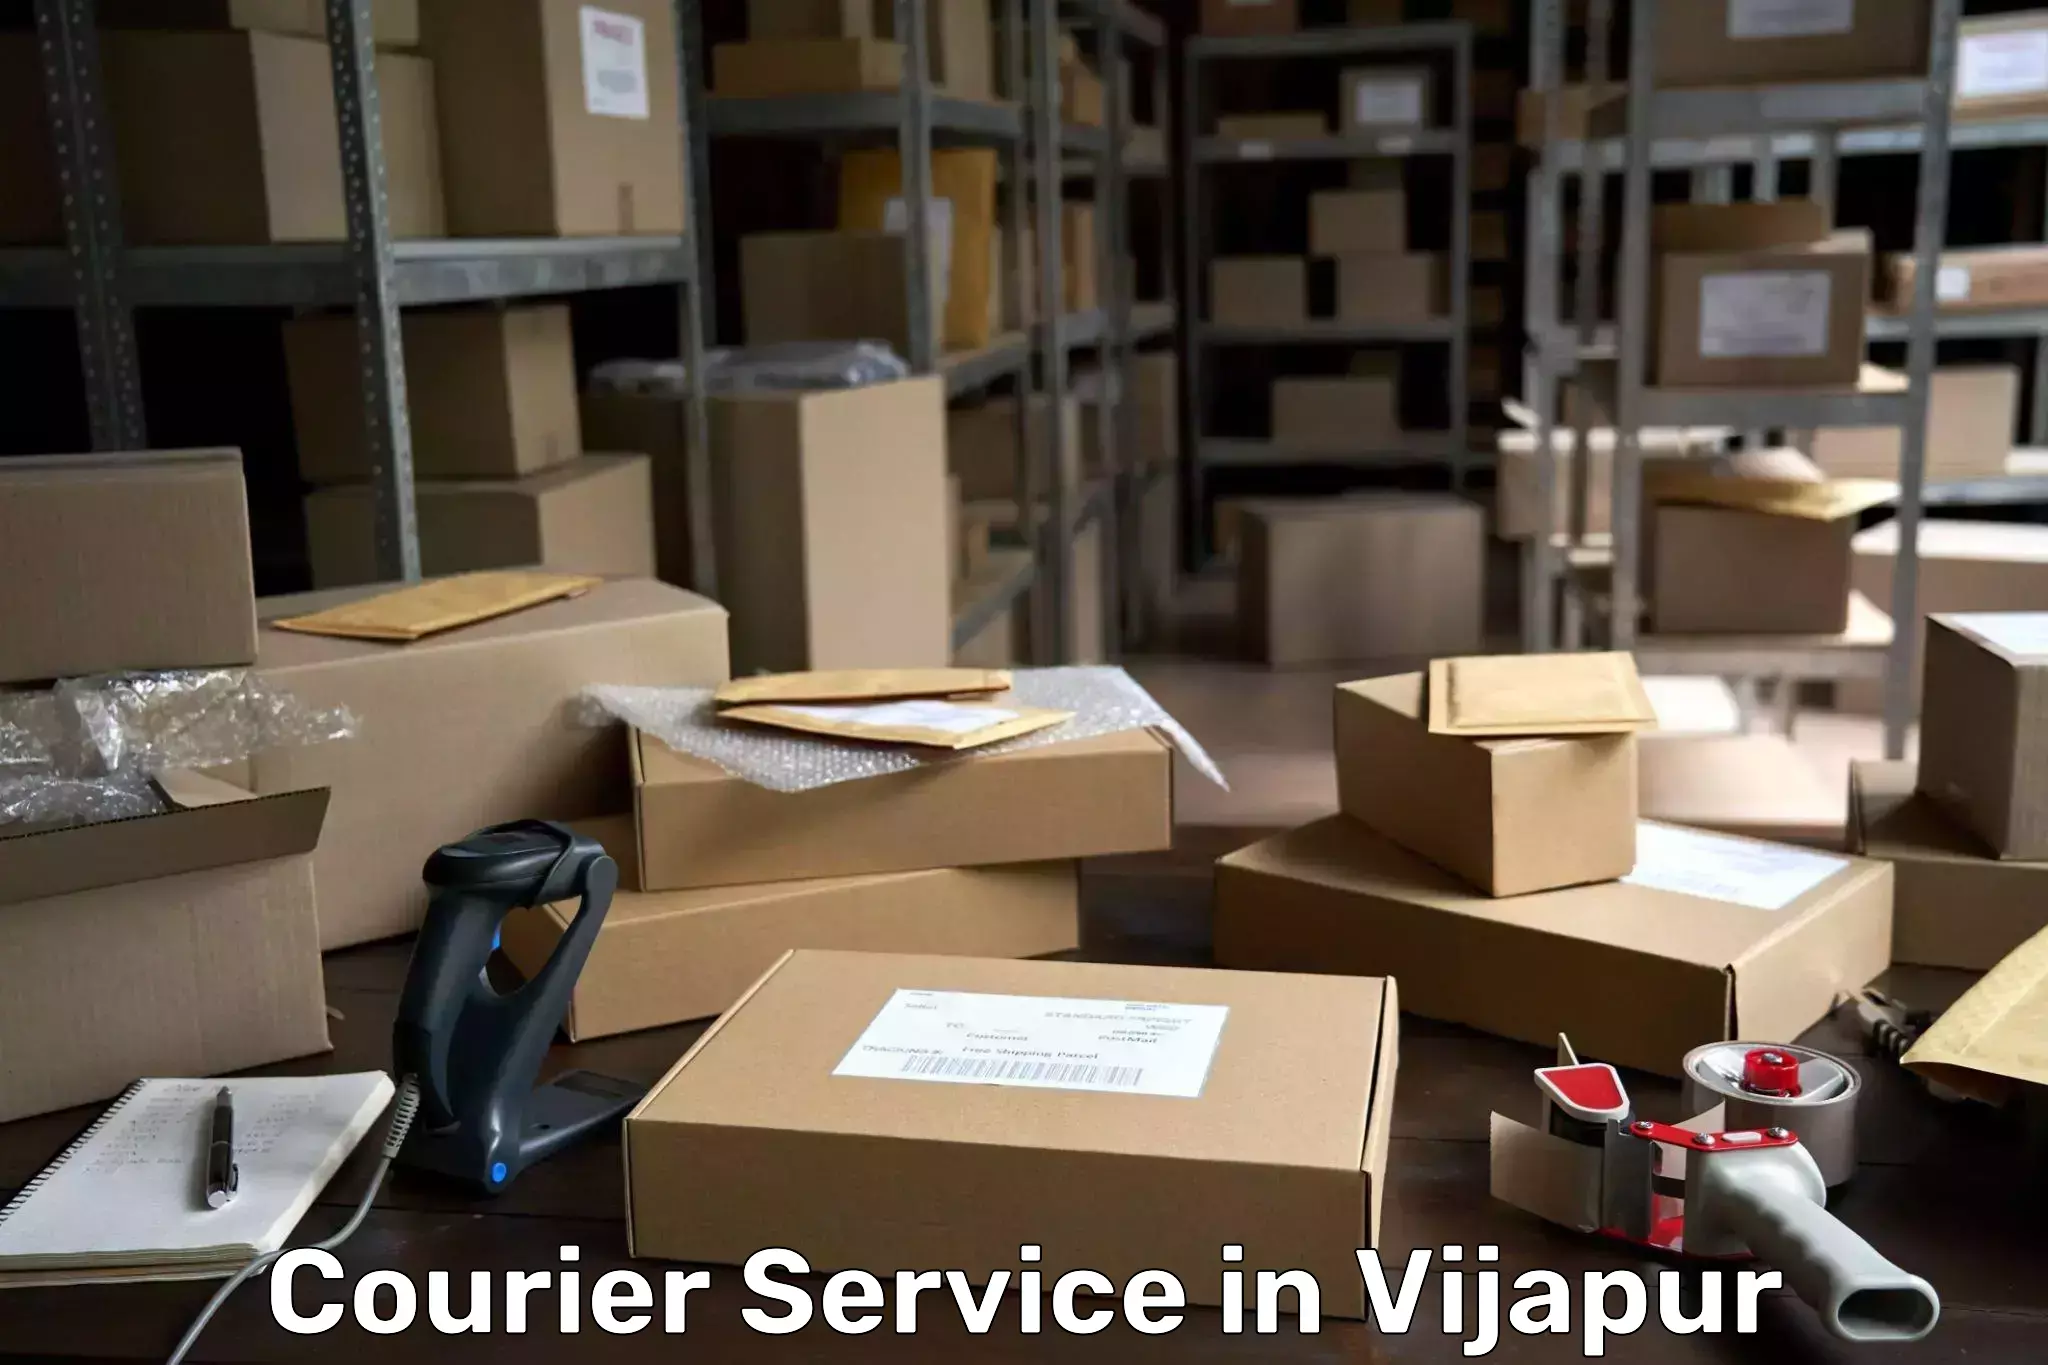 Postal and courier services in Vijapur